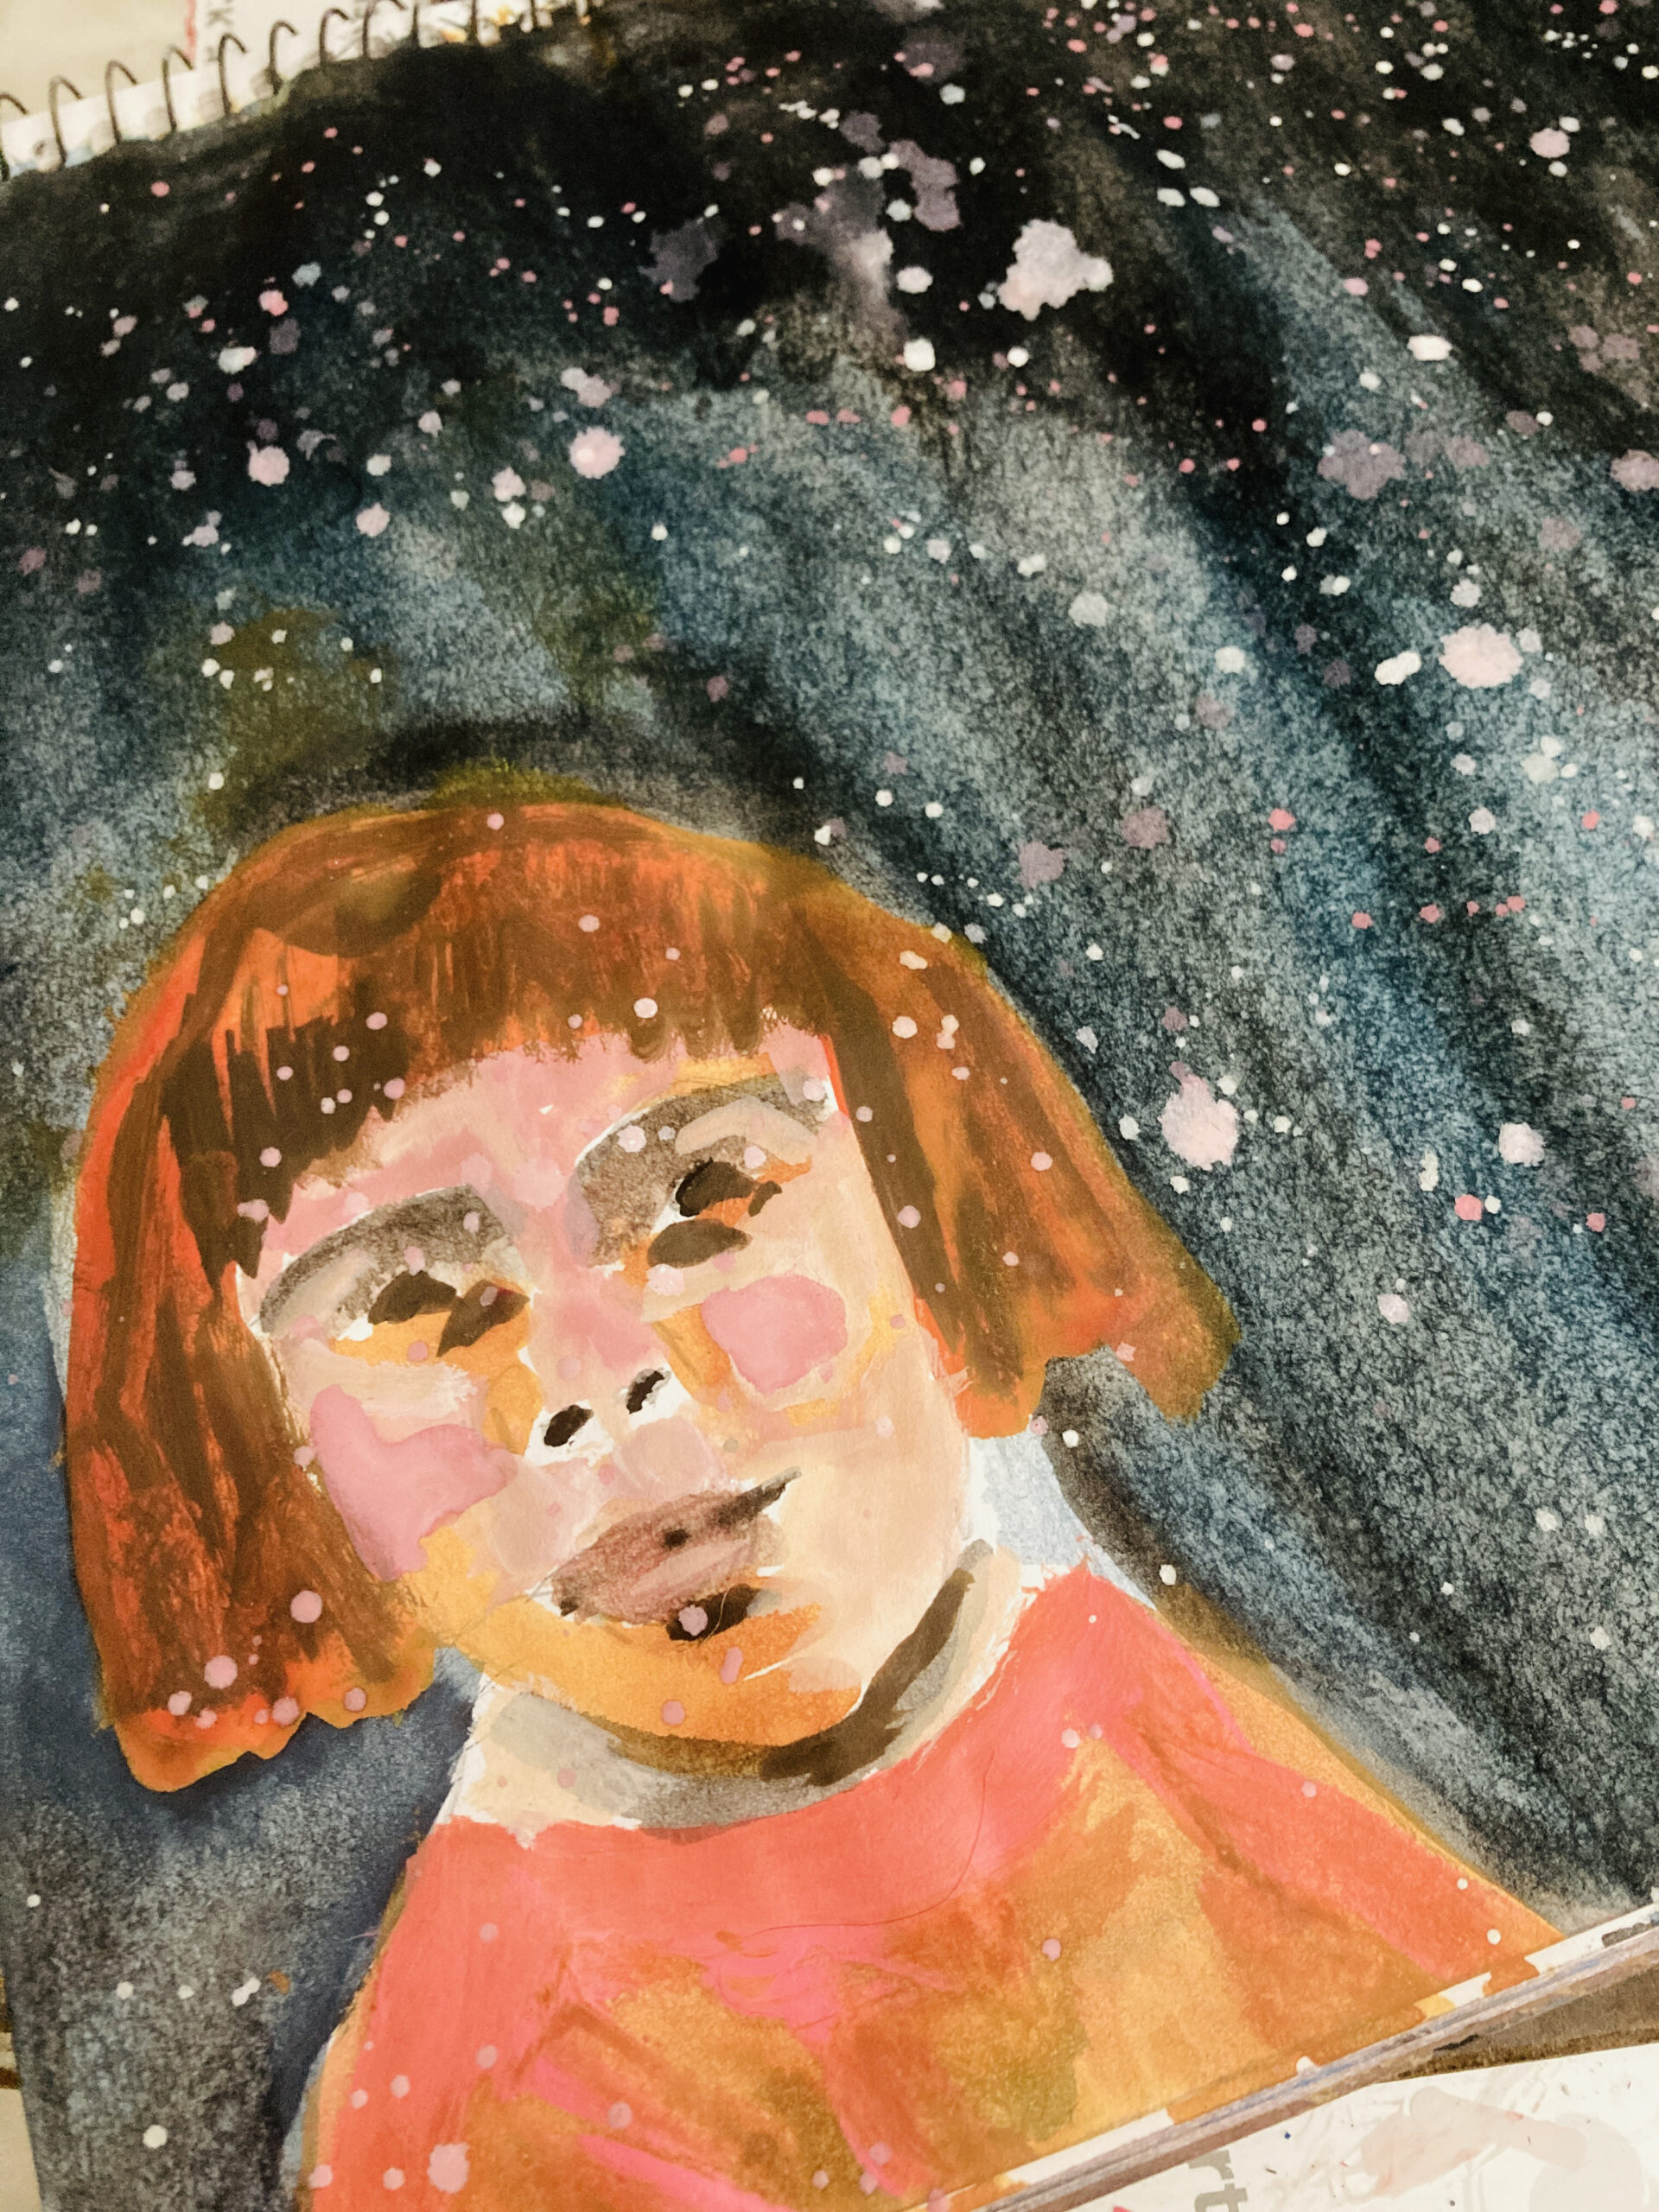 alisaburke: creating with a kid: paint with your feet